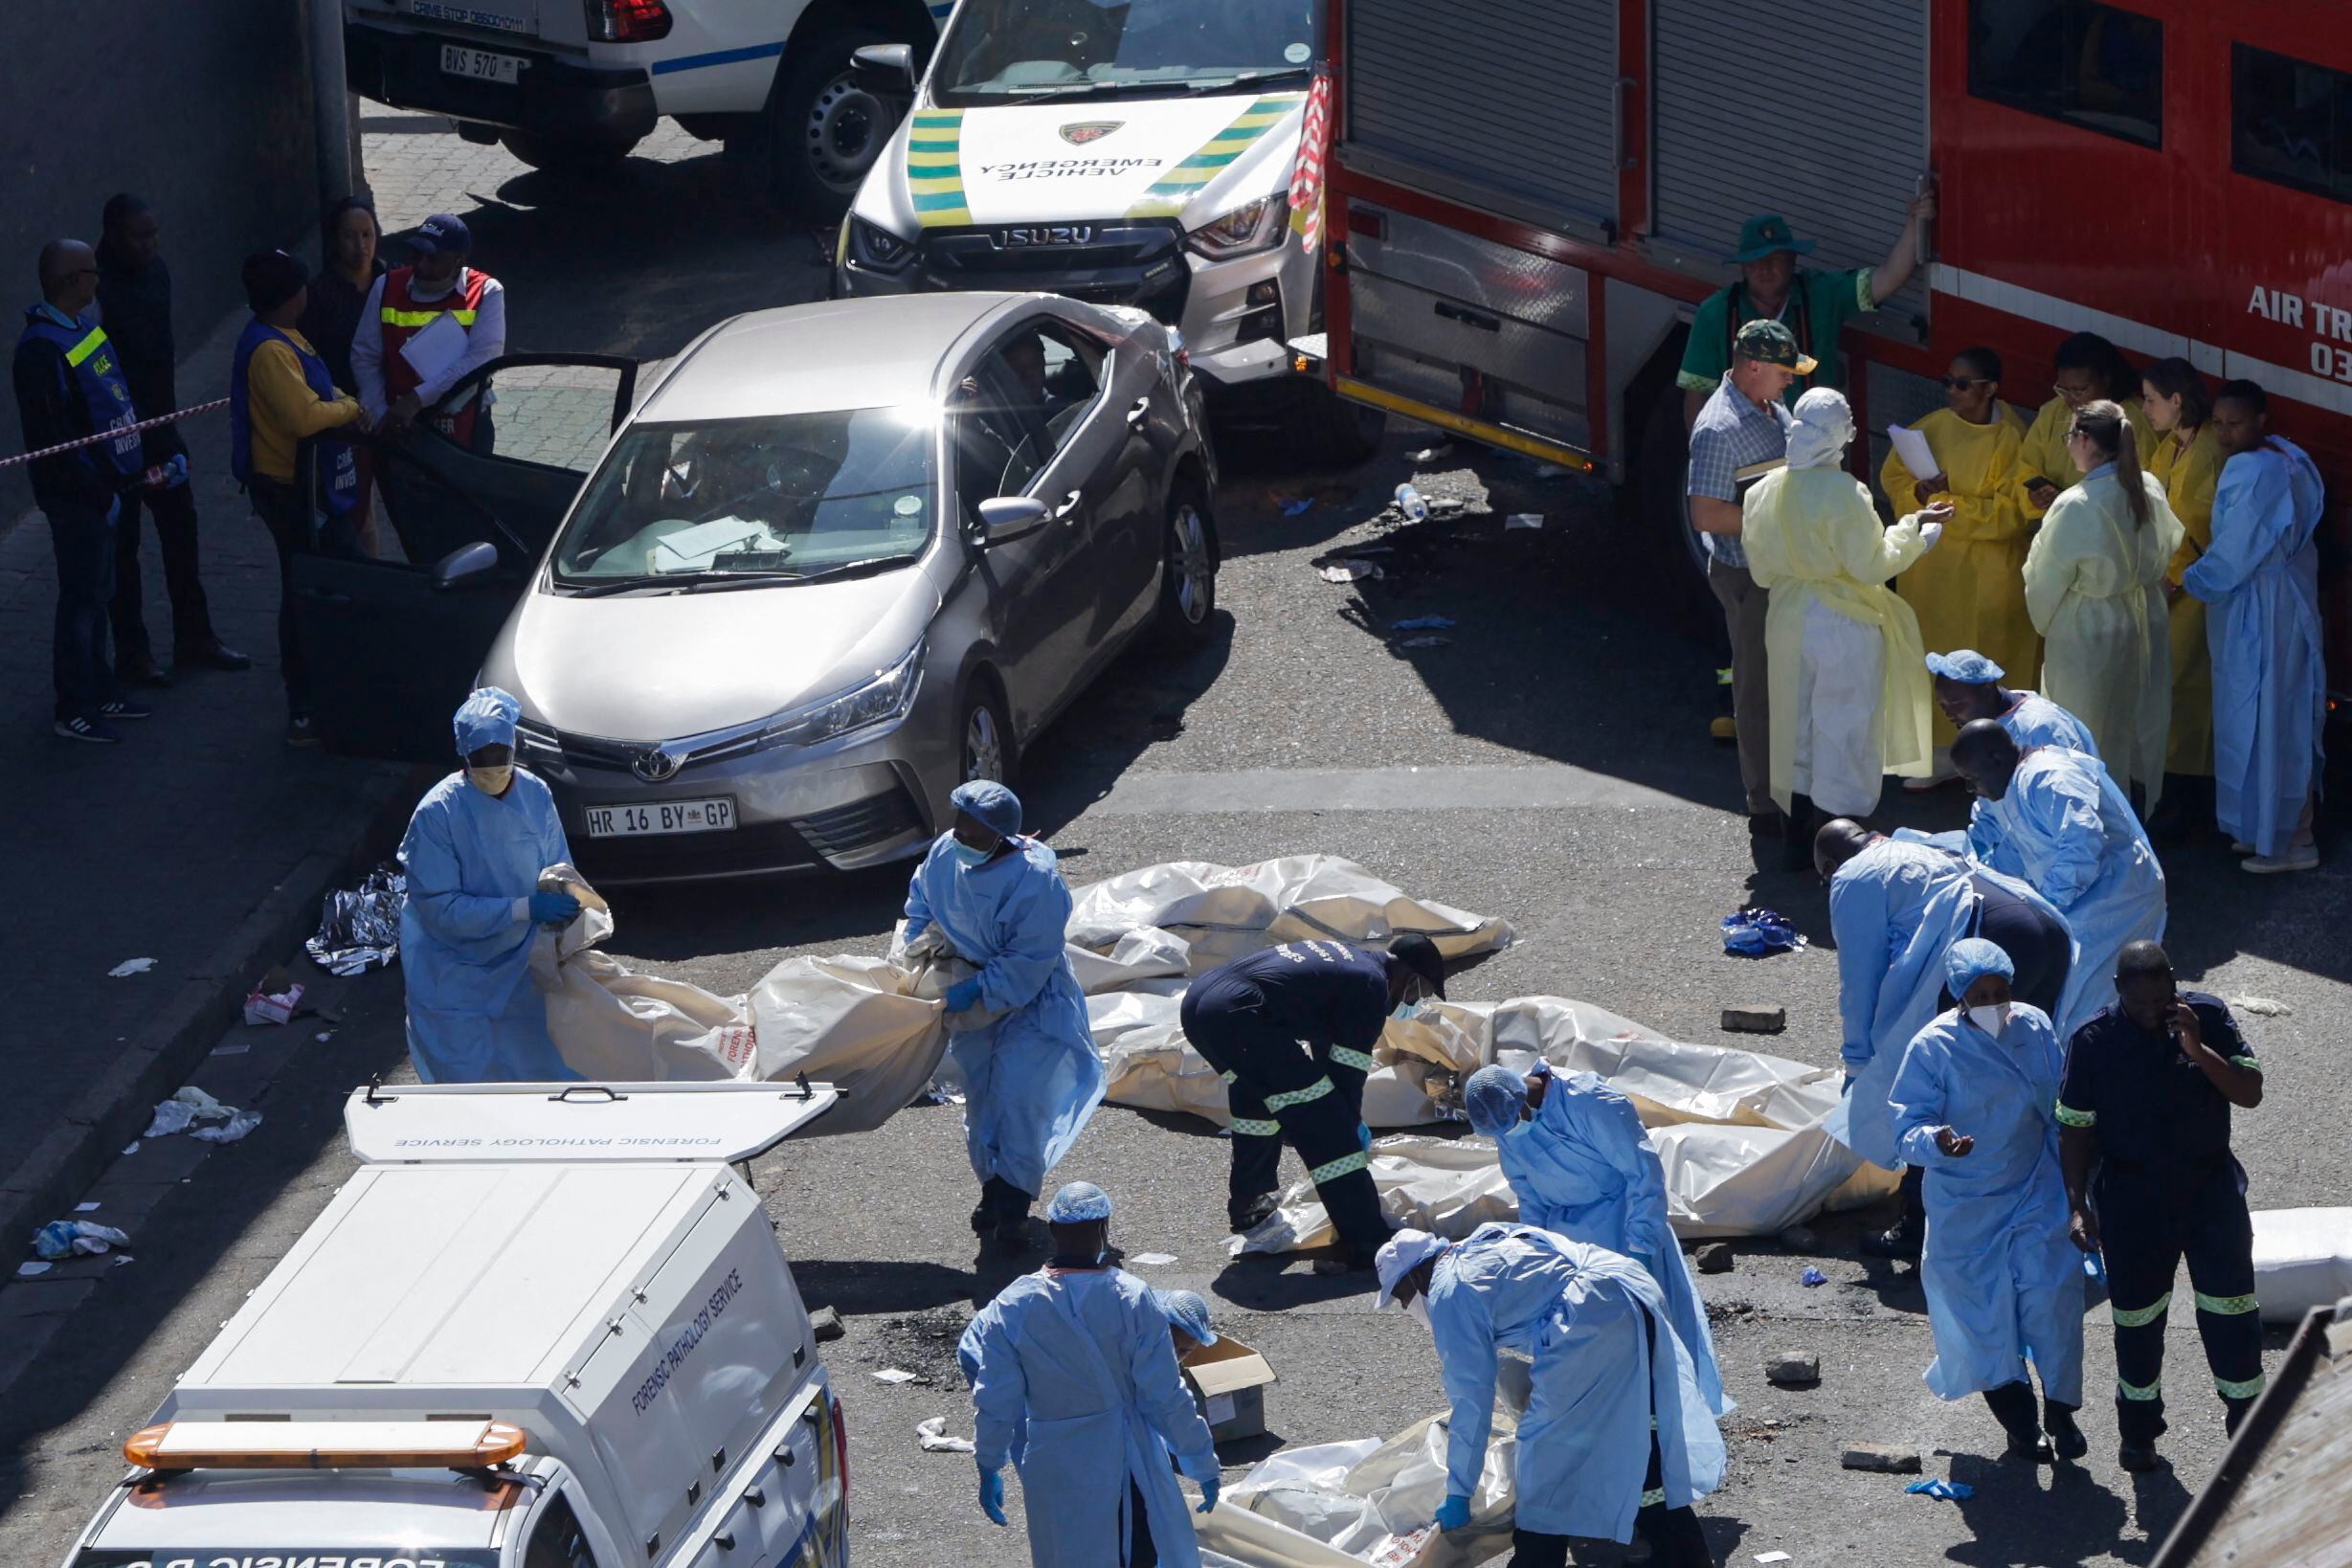 EDITOR'S NOTE: Graphic Content / Members of the forensic department move bodies at the scene of a fire in Johannesburg on August 31, 2023. More than 70 people died in a fire that tore through a five-story building in downtown Johannesburg on August 31. August 2023. 2023, the South African city's emergency services said.  (Photo: Guillem SARTORIO / AFP)